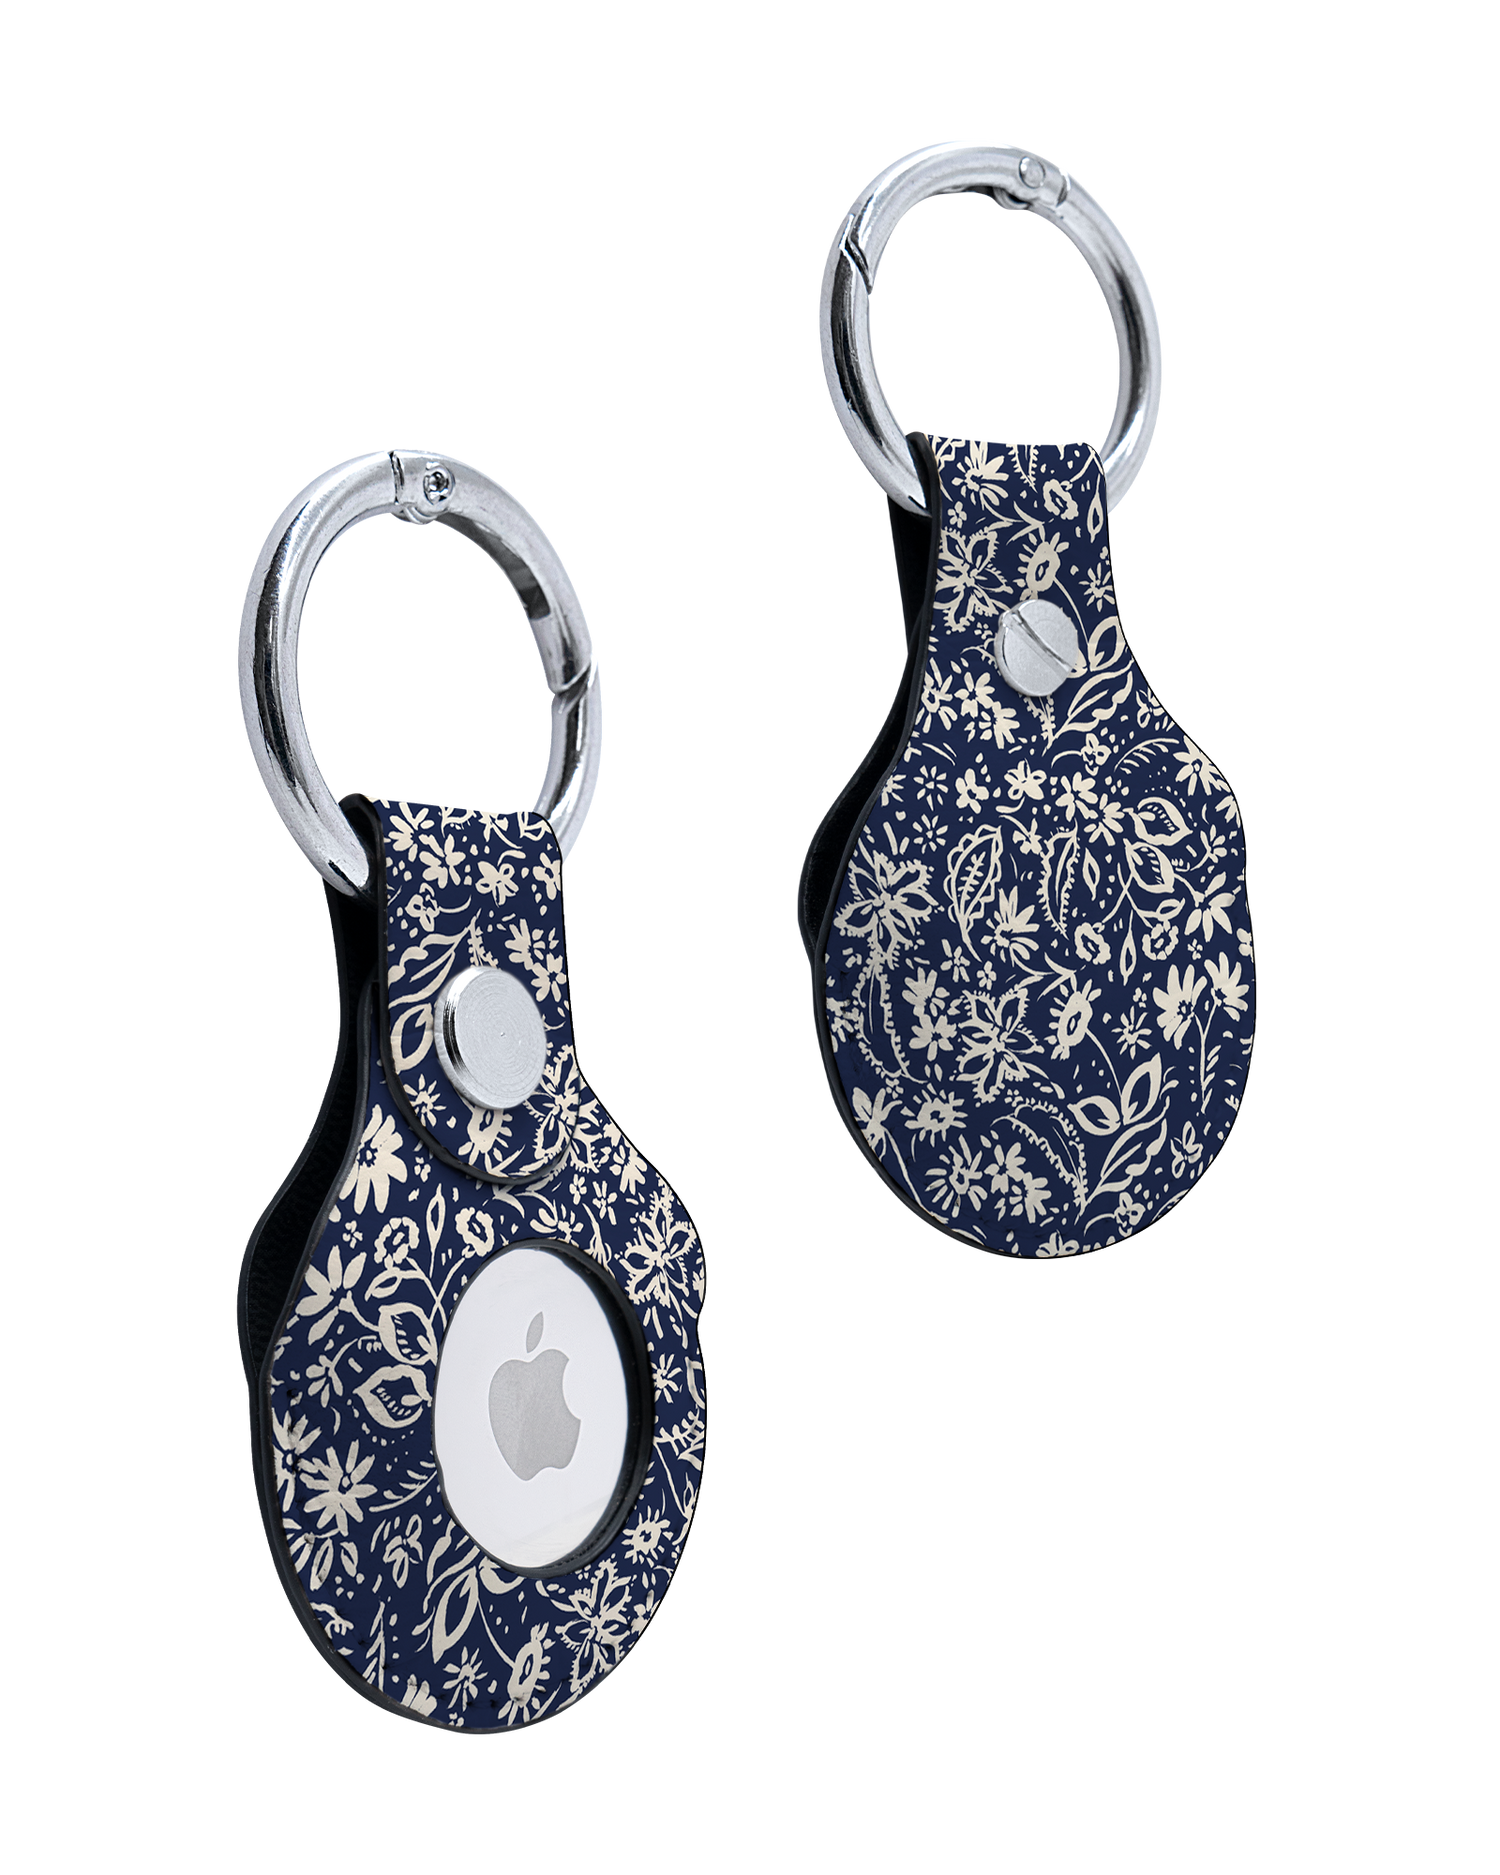 AirTag Holder with Ditsy Blue Paisley Design: Front and Back